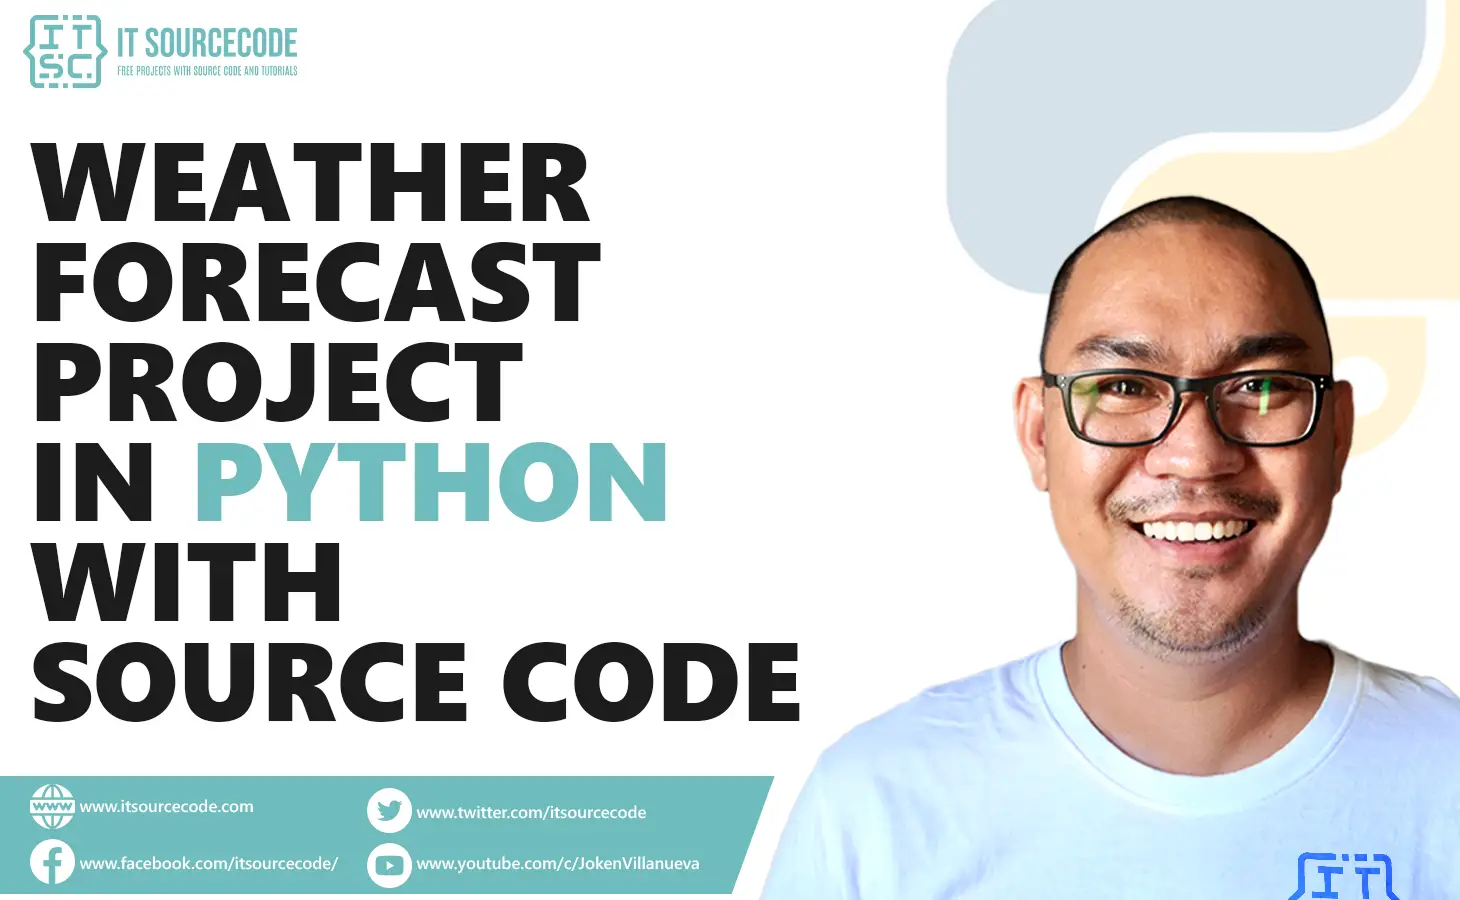 Weather Forecast Project In Python With Source Code